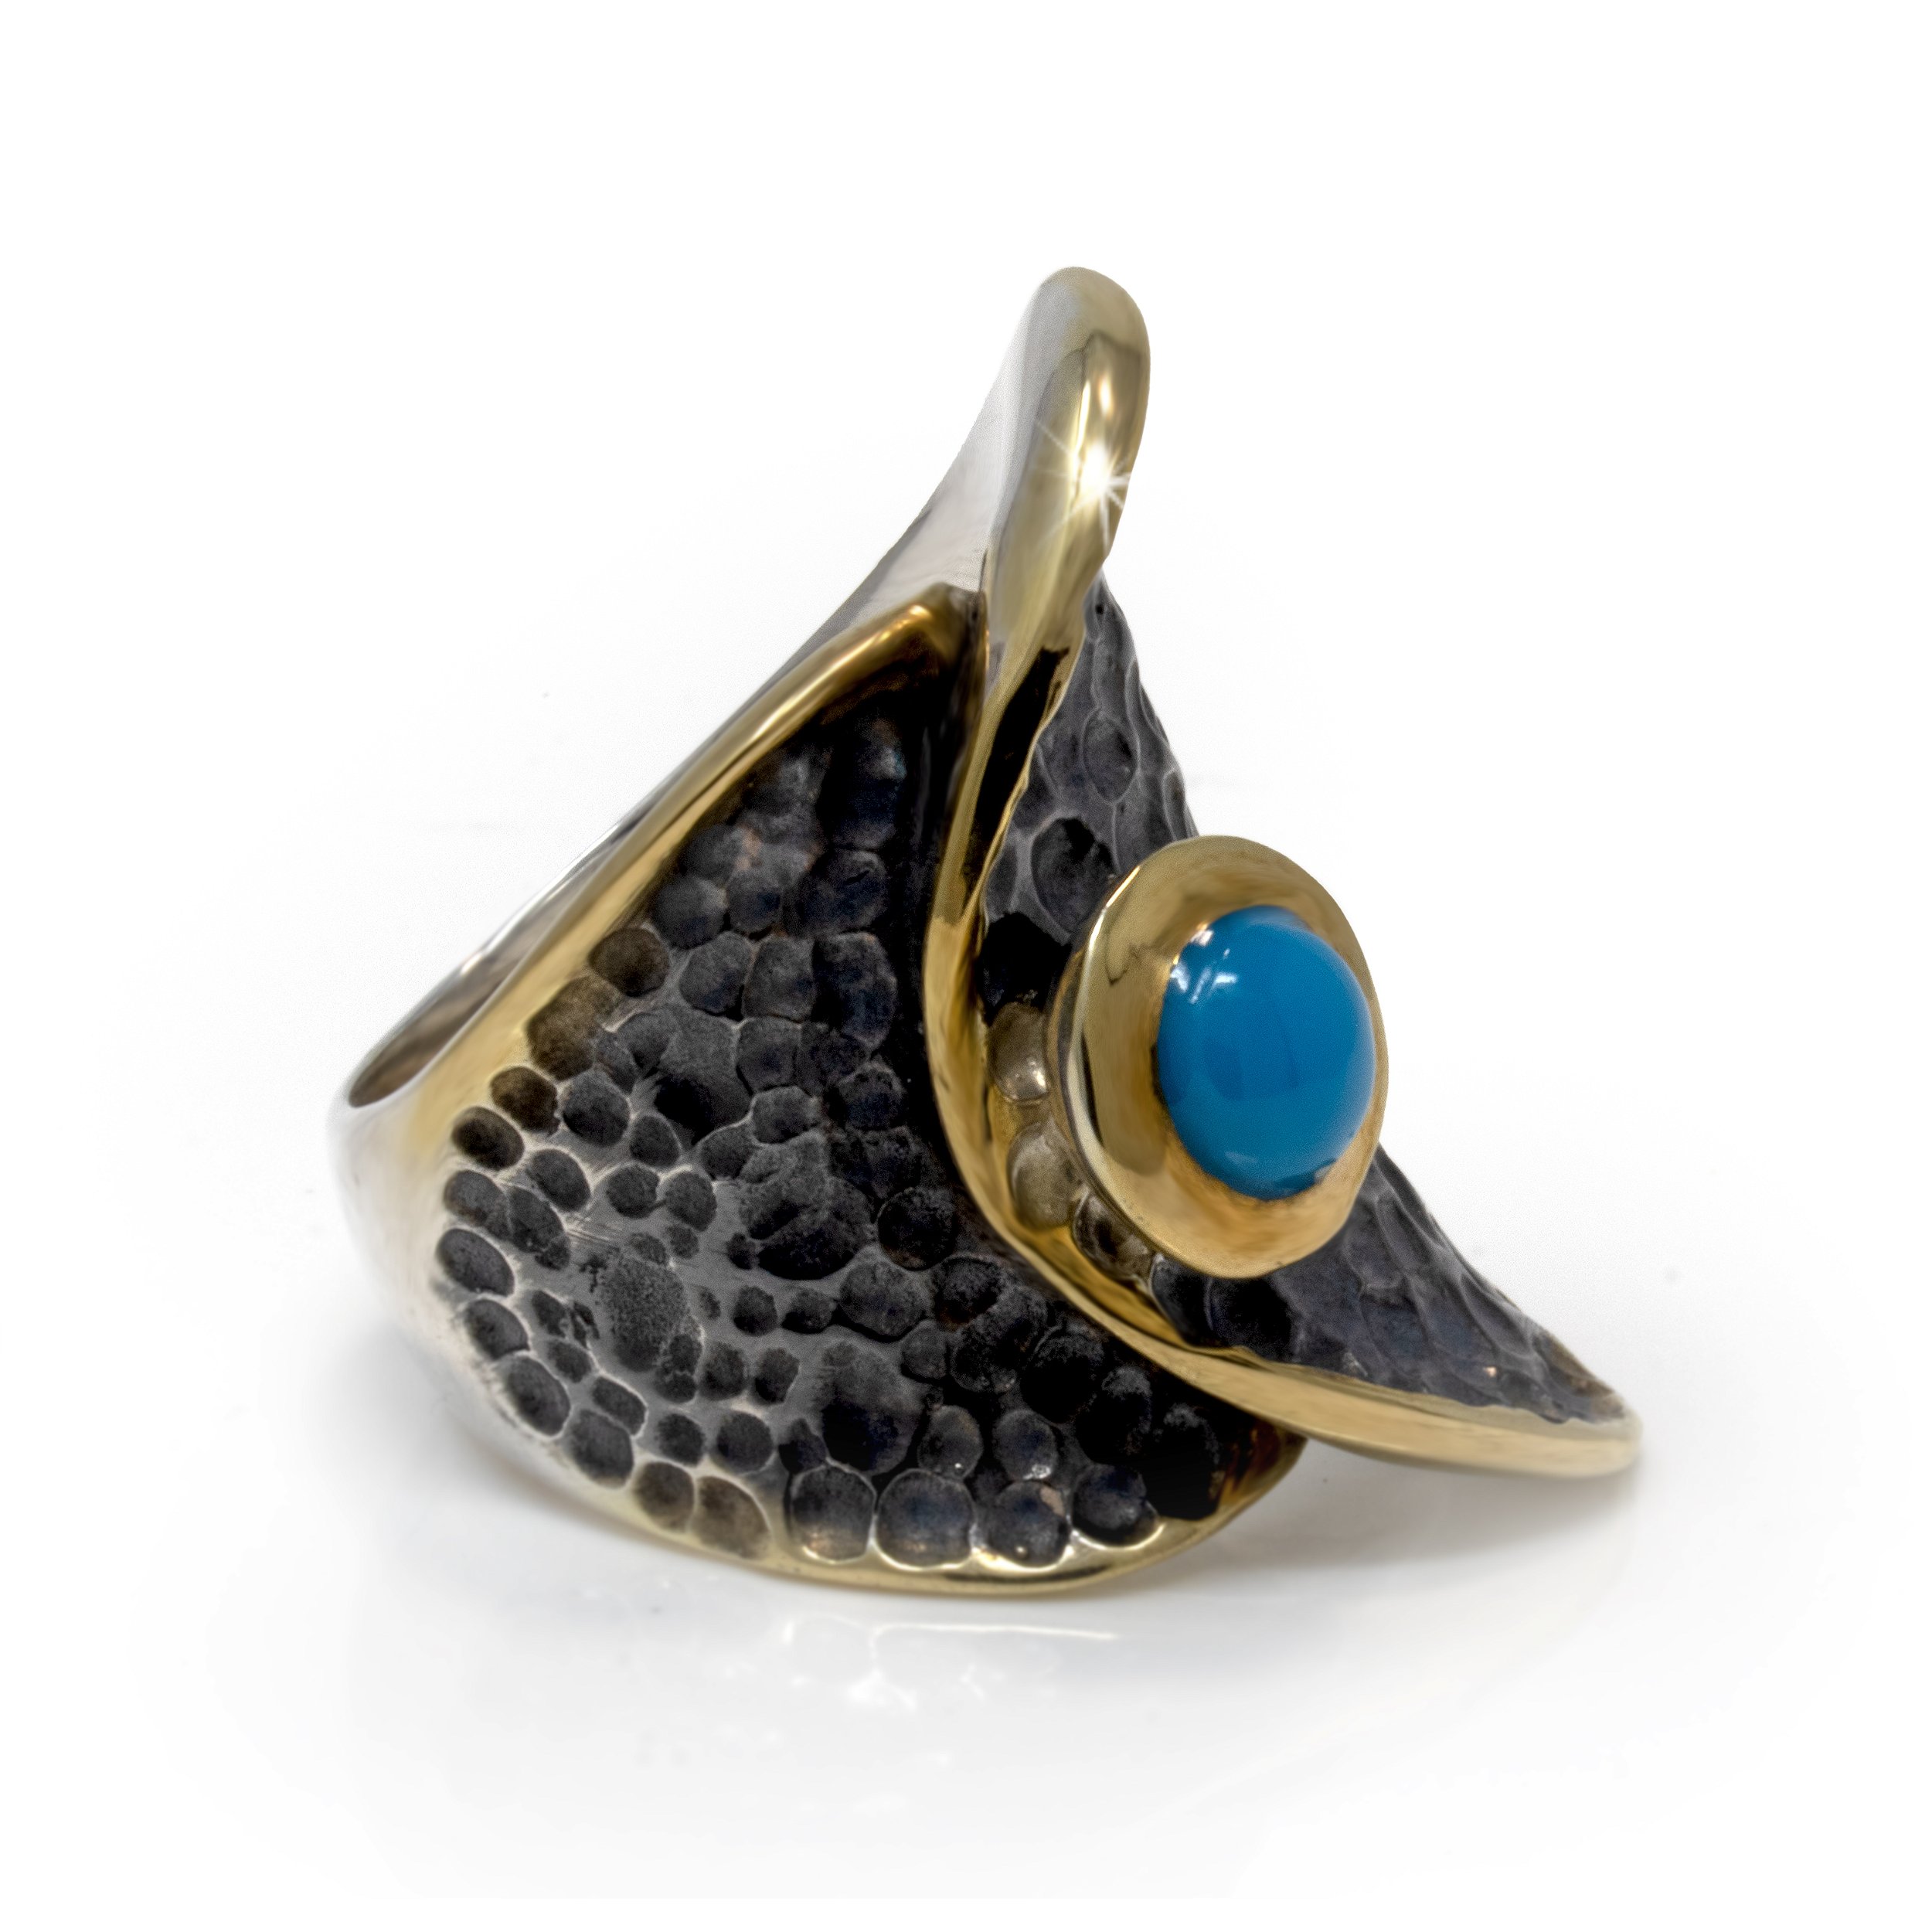 New Mexico (Campositos) Turquoise Ring - Round Cabochon With Gold Vermeil Bezel Set On Hammered Oxidized Band With "Falling Leaf" Folded Design - Gold Vermeil Size 7